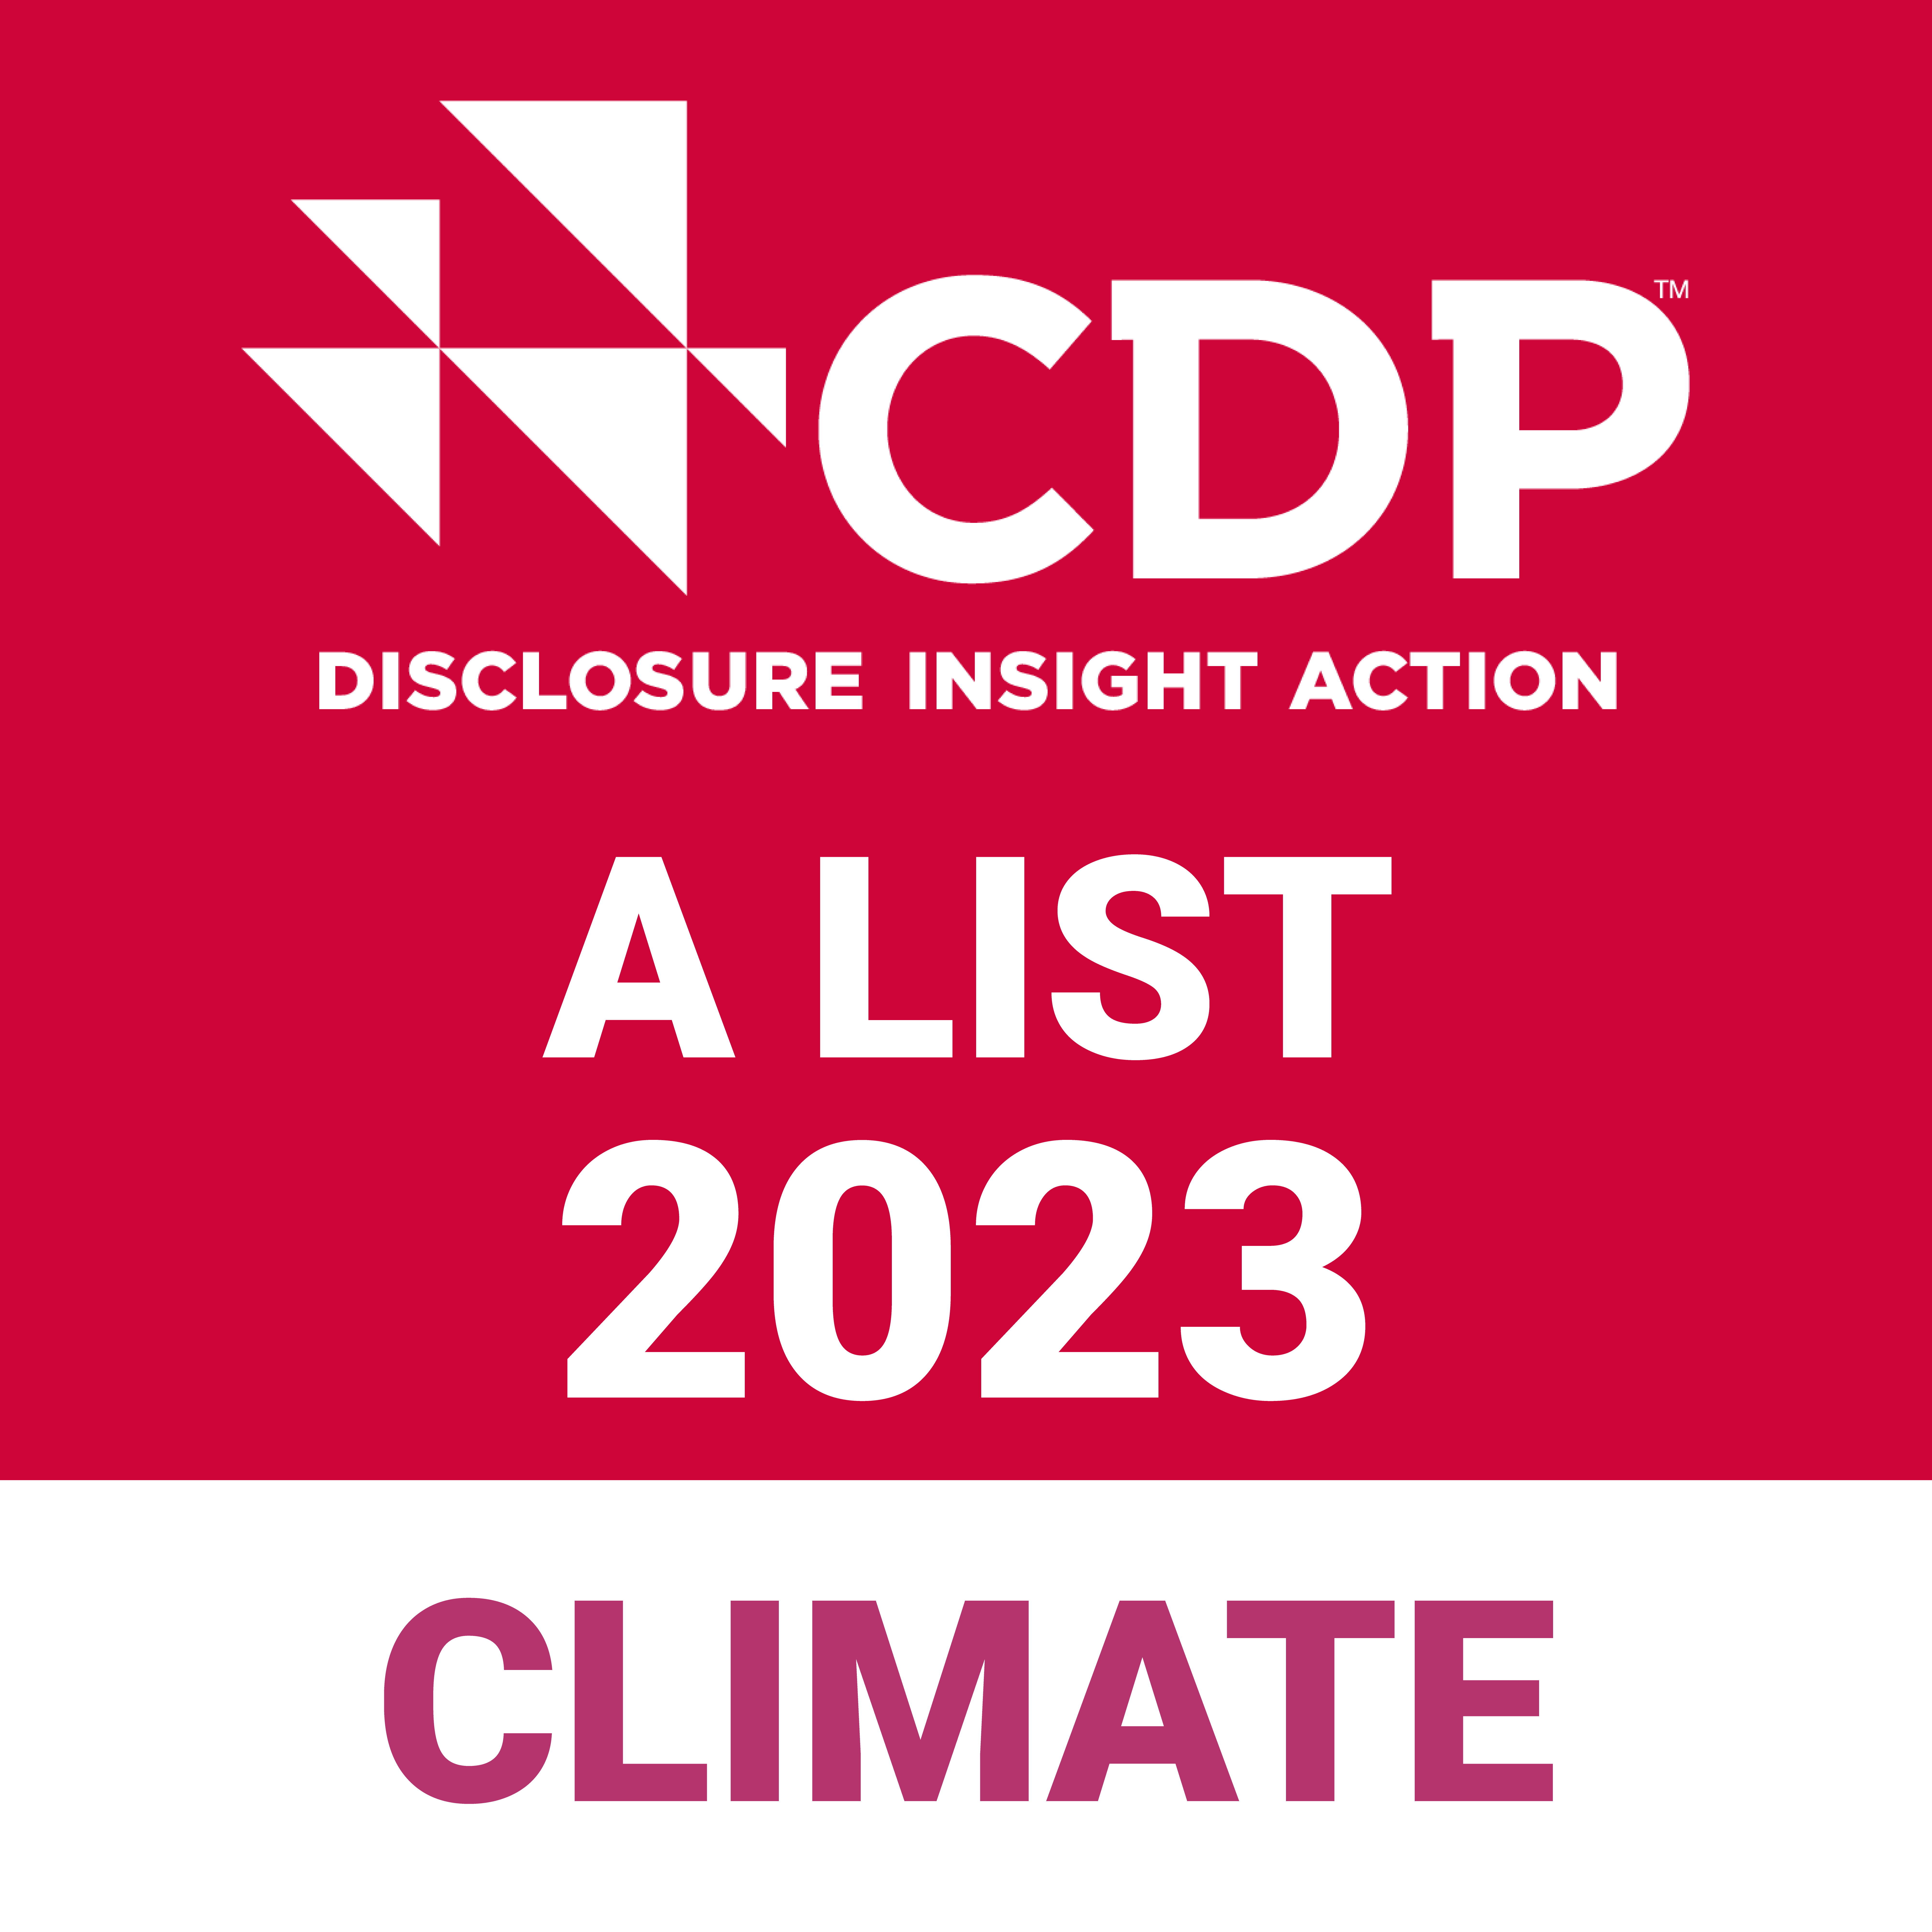 Joshin Denki Earns CDP’s Highest Rating of “A” in the Climate Change Category 